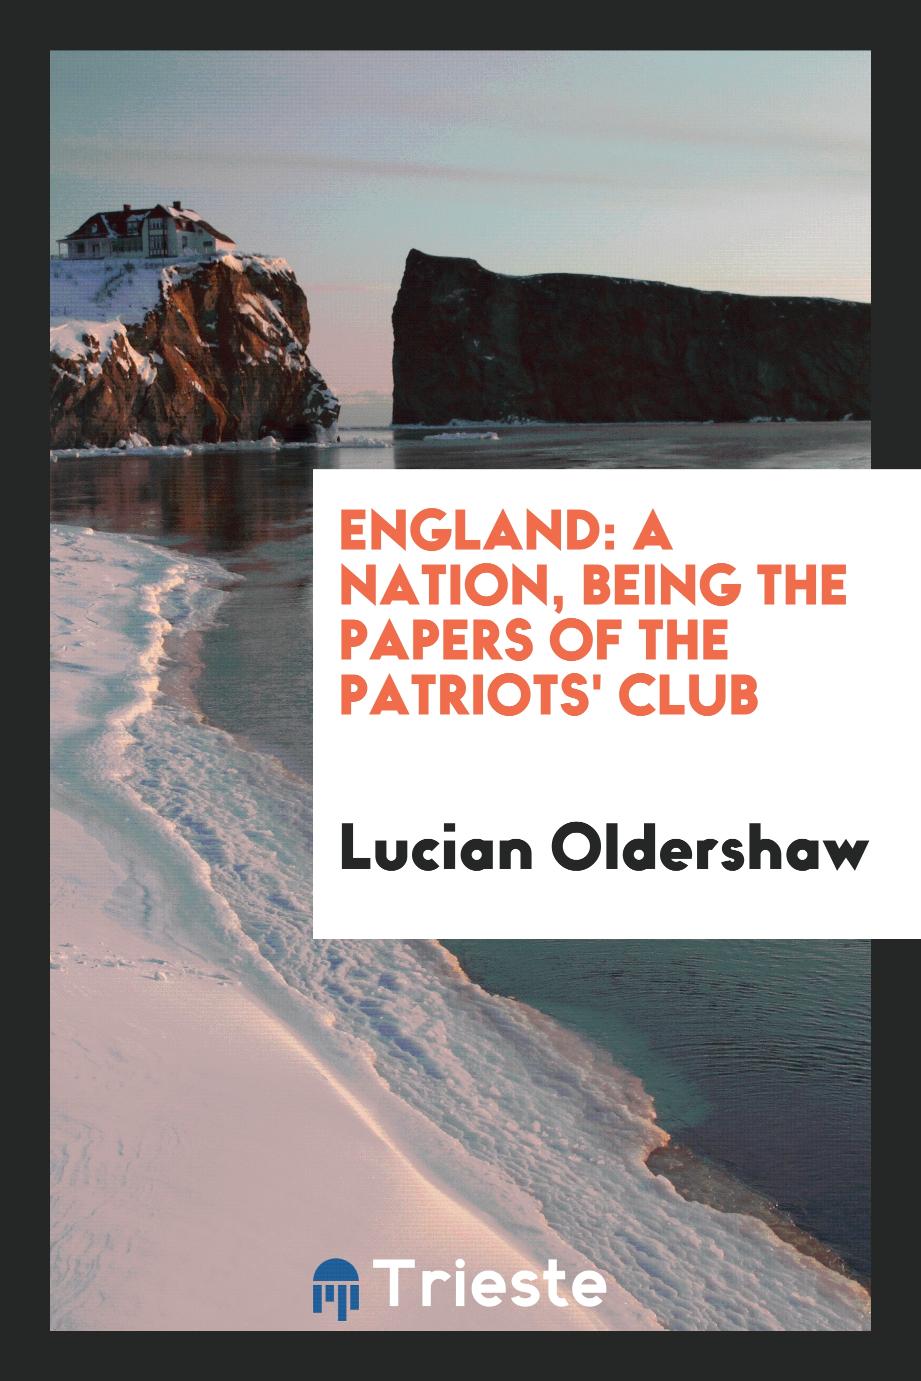 England: a nation, being the papers of the Patriots' Club